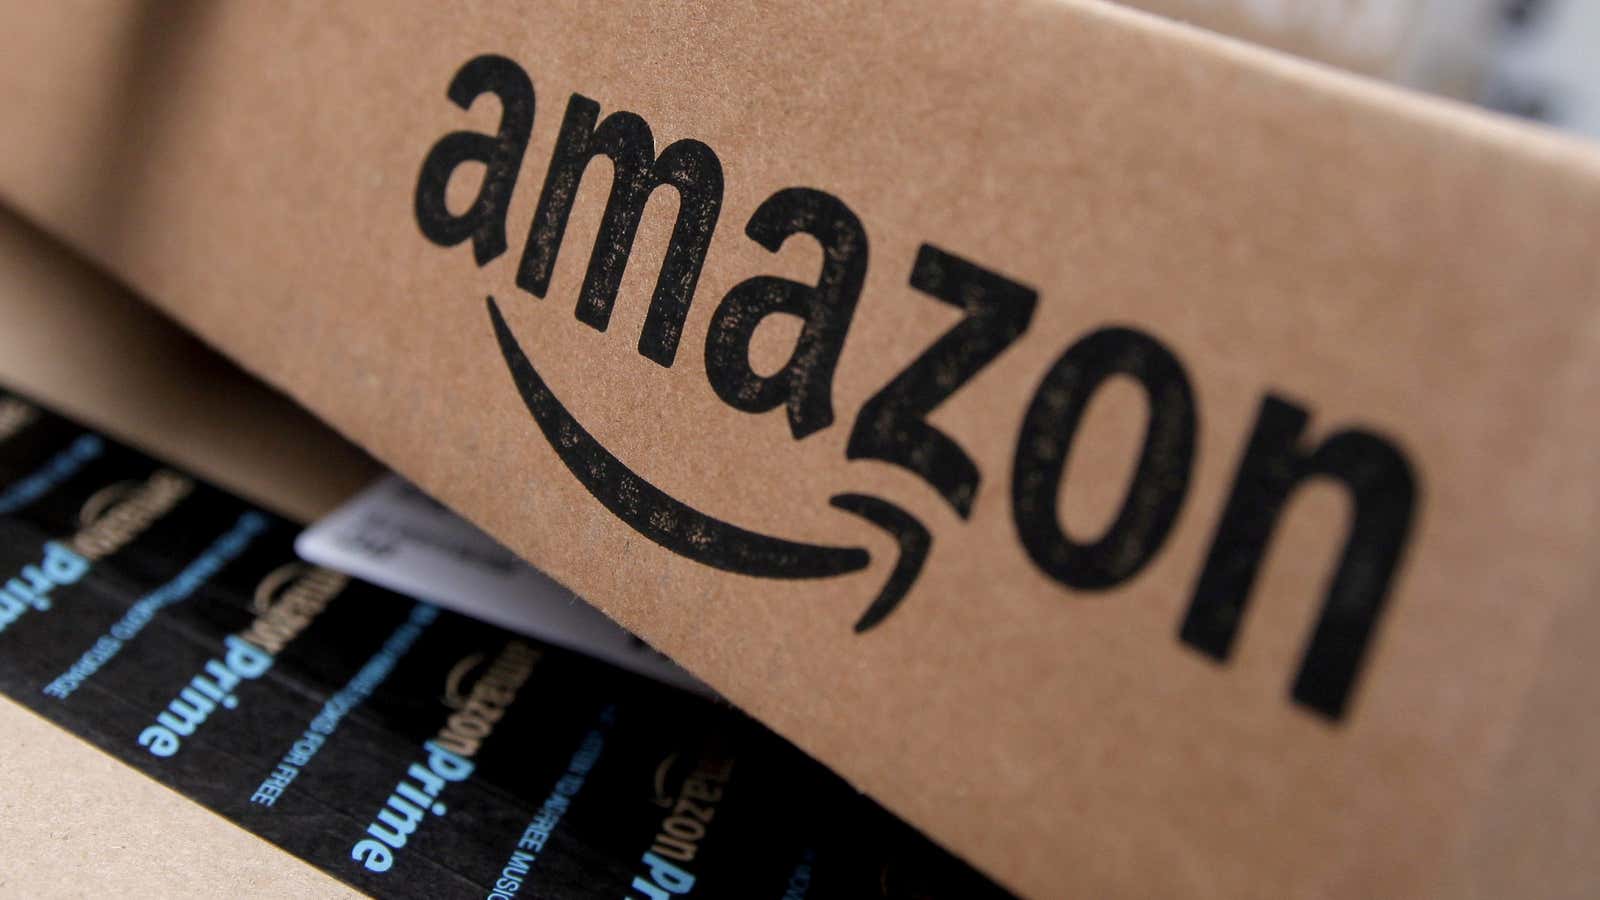 Amazon is aiming for a new paradigm in clothing: Sell it, make it, ship it.